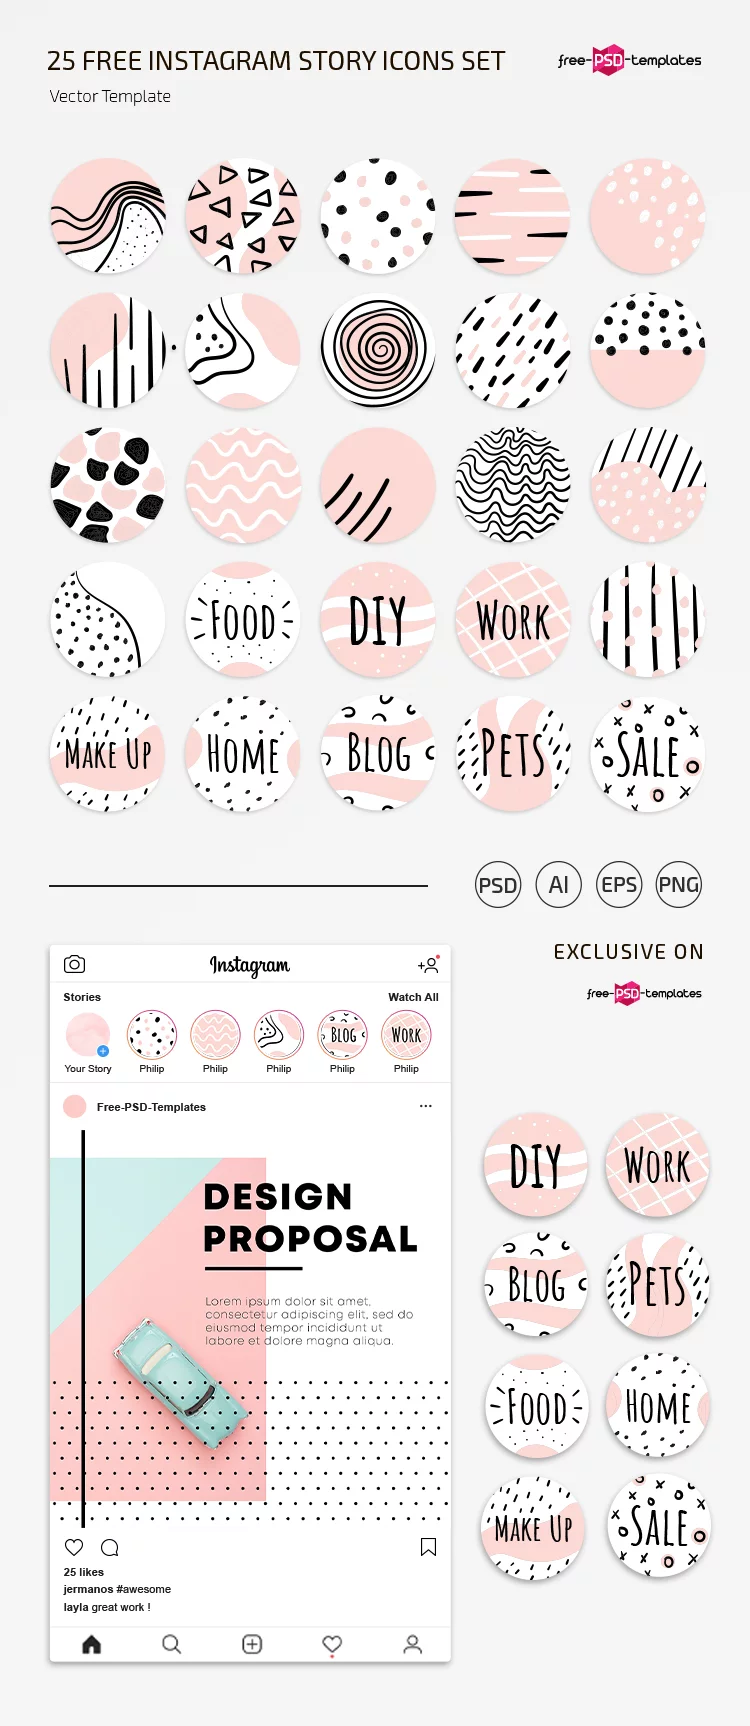 Free Vector Instagram Icons for Stories